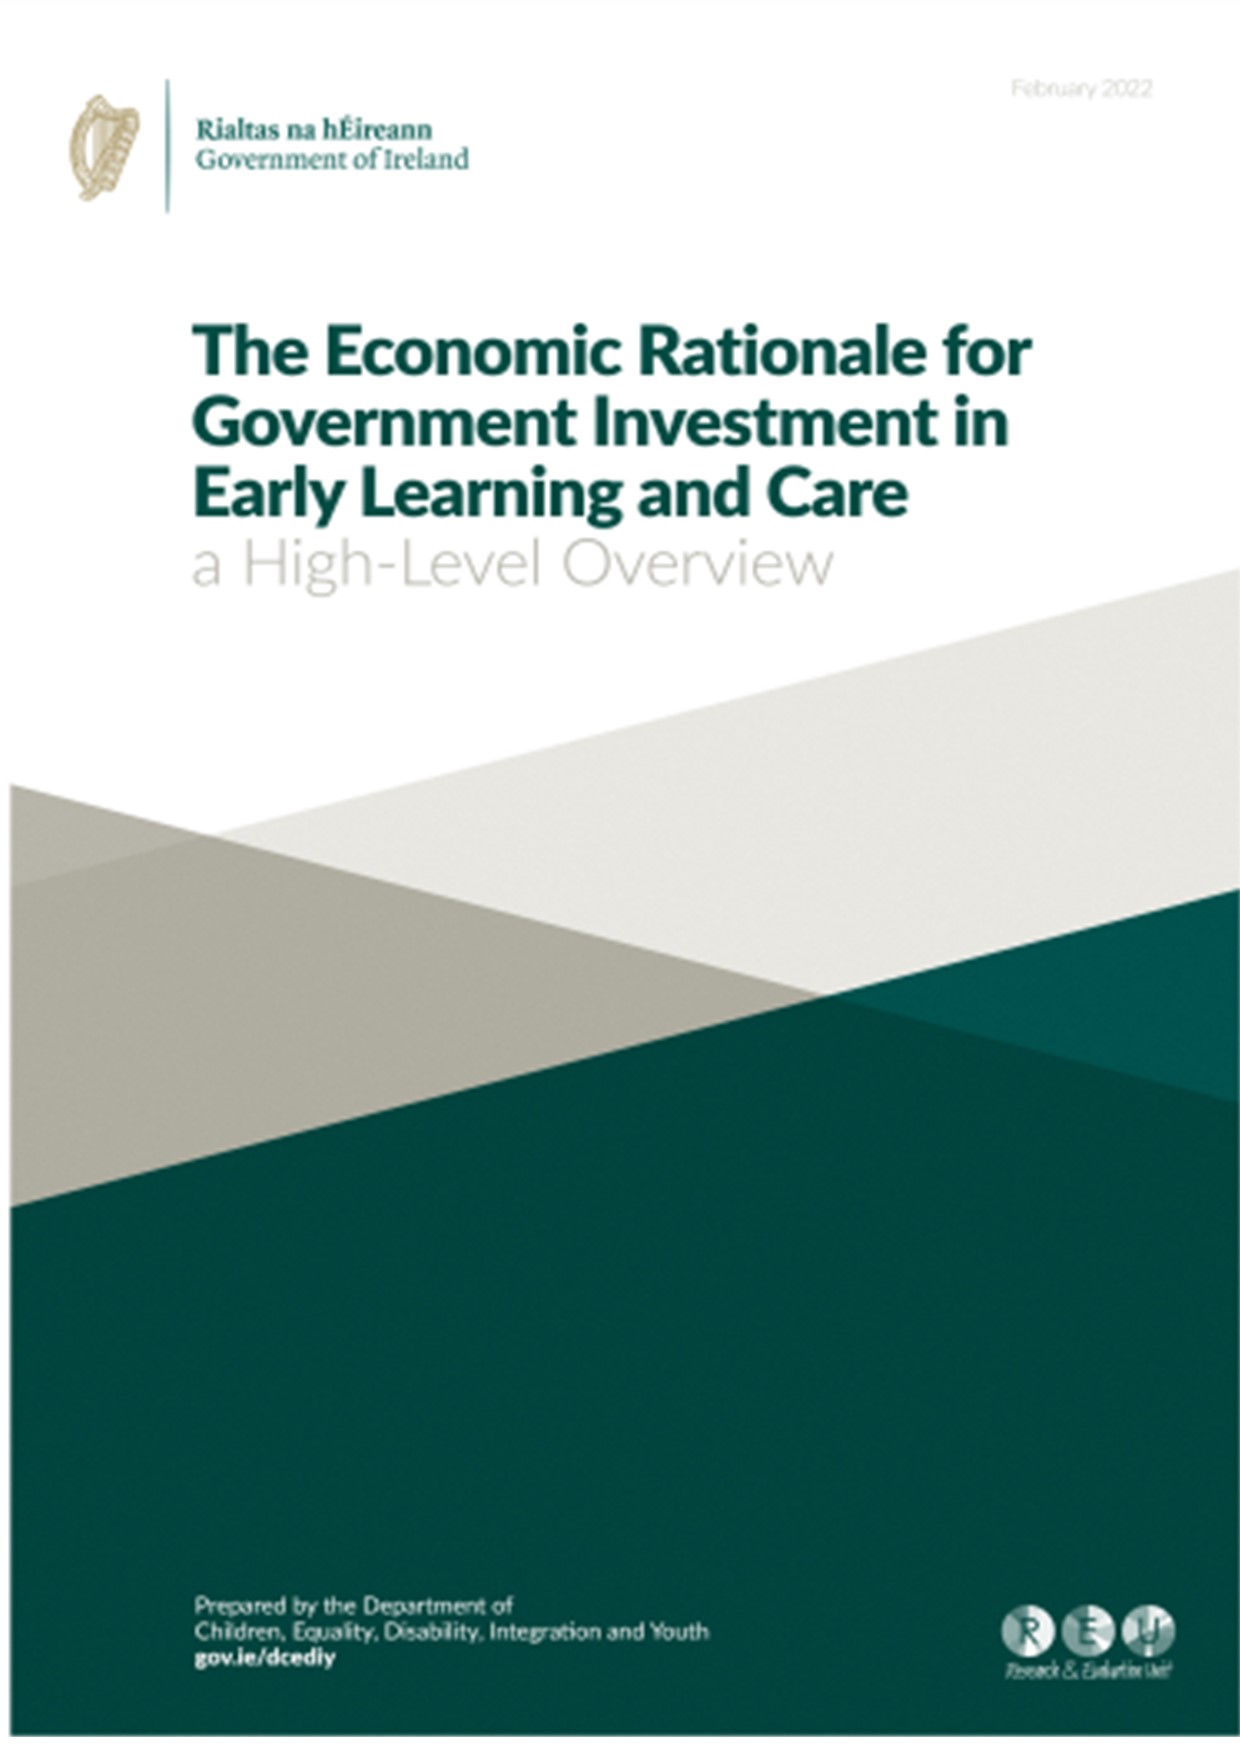 The Economic rationale for goveernment investment in early learning and care a high level overview